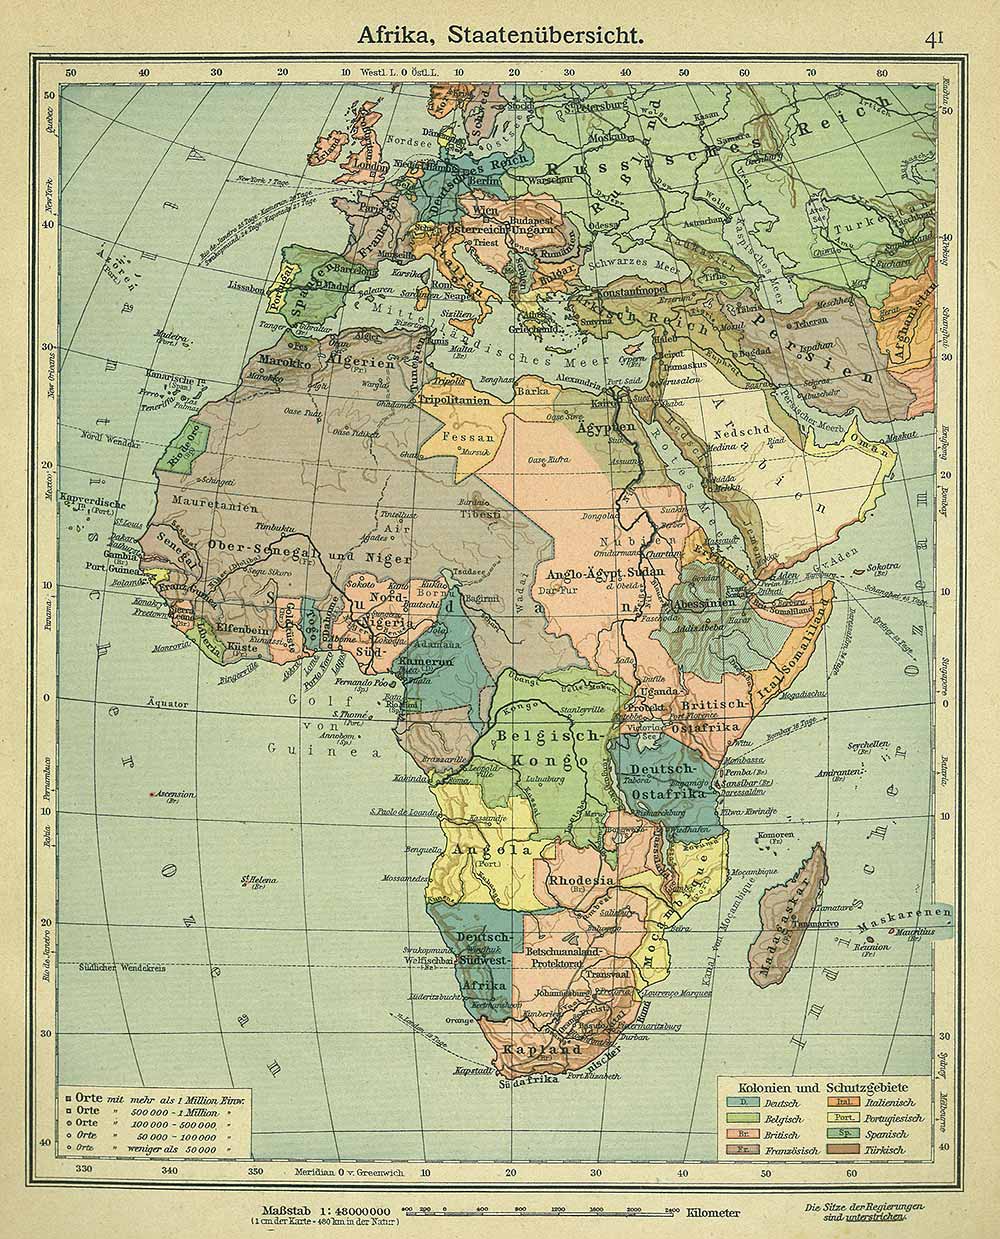 African states, colonial areas of interest, Andrees 'Berliner Schul-Atlas', 1916, page 41, published size to print borders 20.56 cm wide by 26.24 cm high.